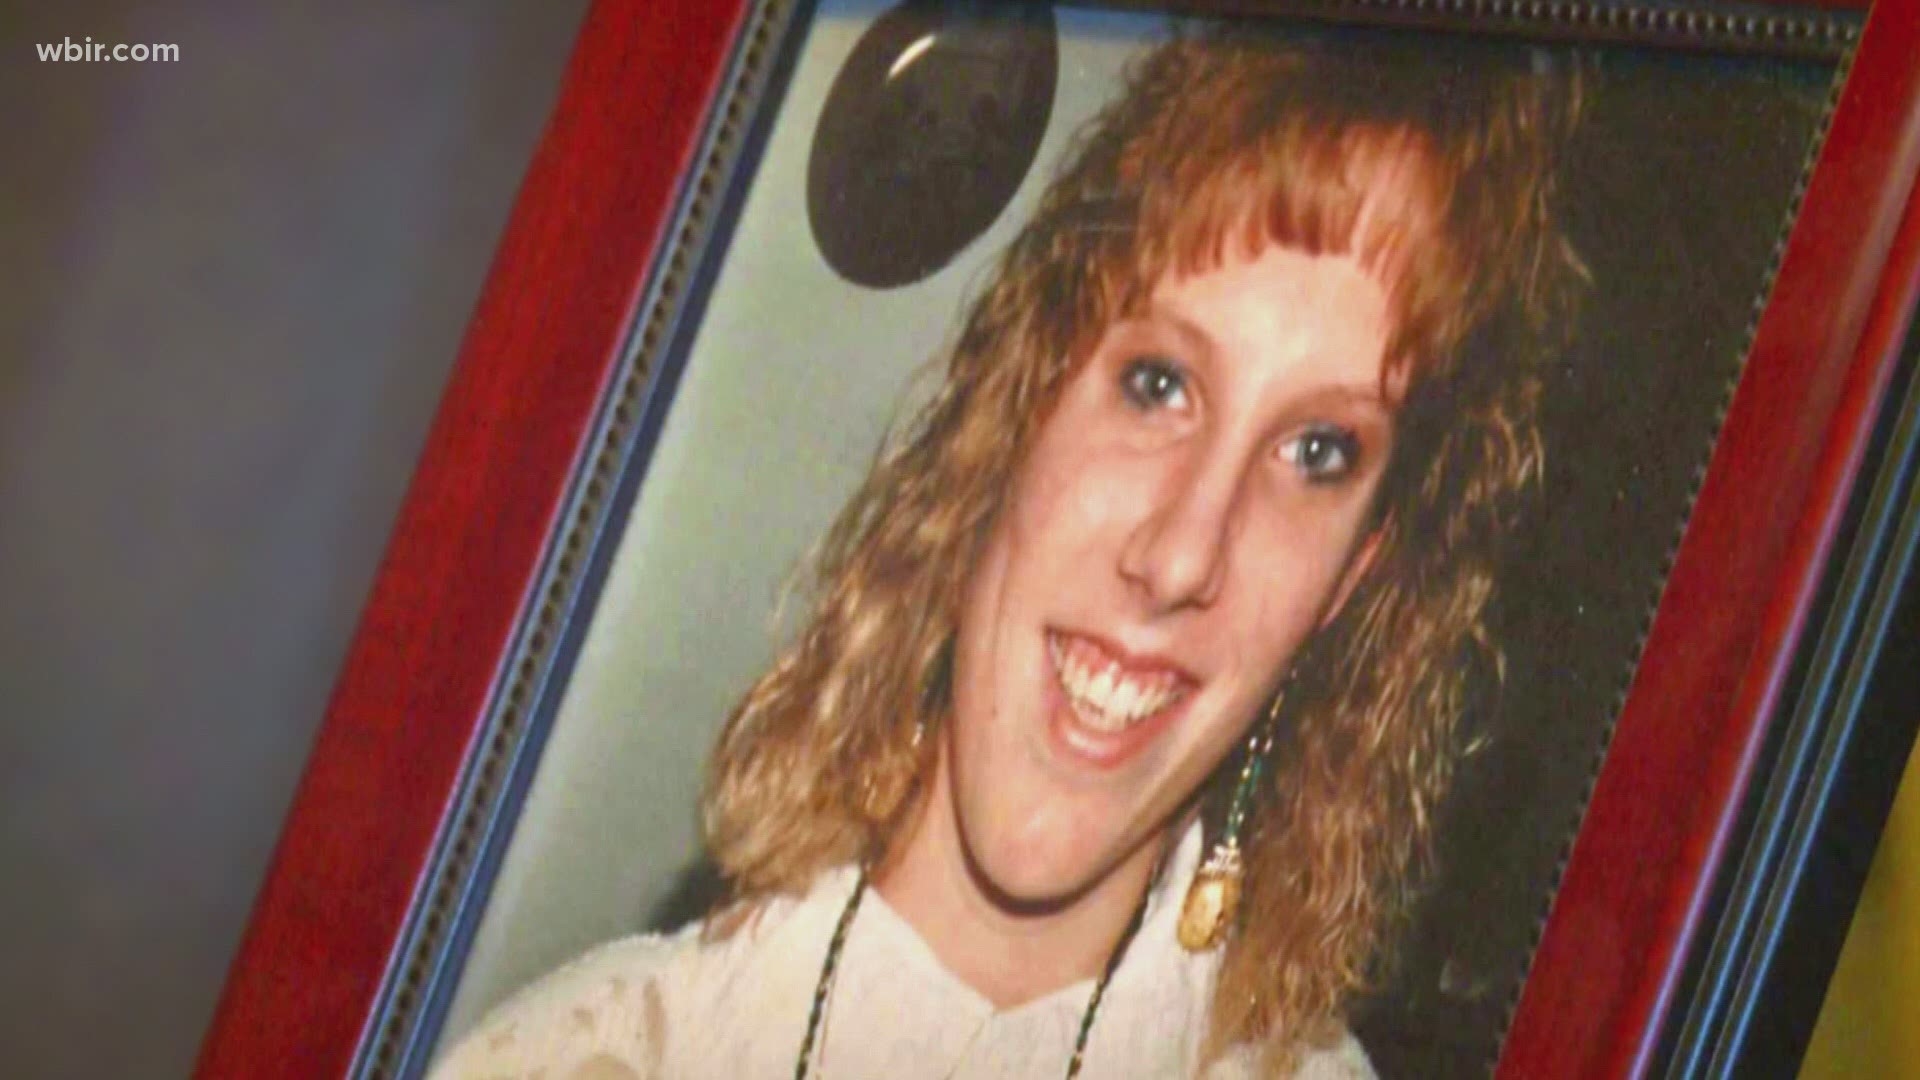 Colleen Slemmer's mom said she would like to see a date scheduled for Christa Pike to be executed. Pike was sentenced to death in 1996 for brutally killing Slemmer.